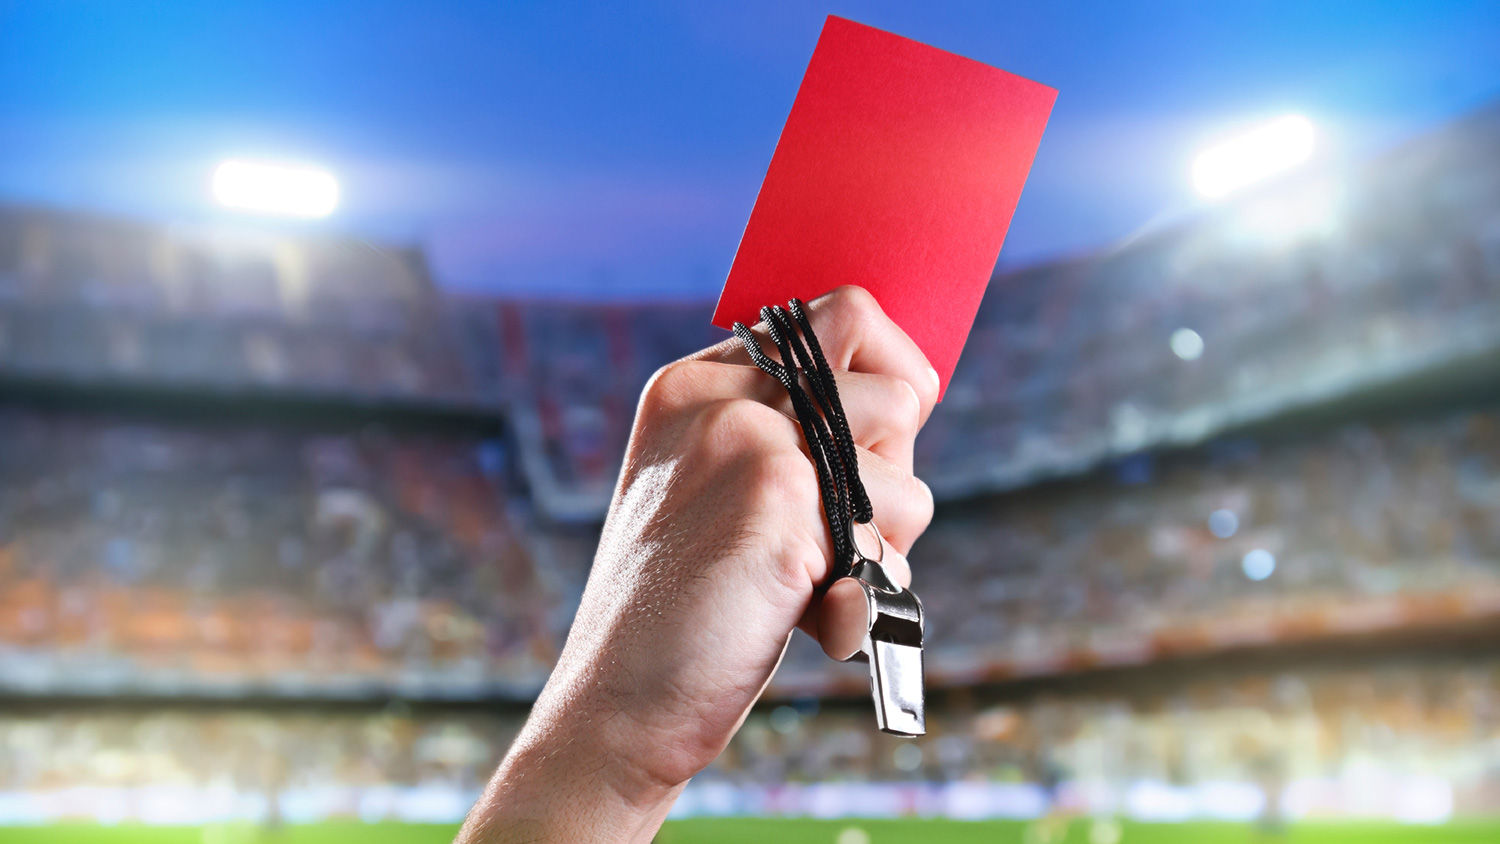 A football red card